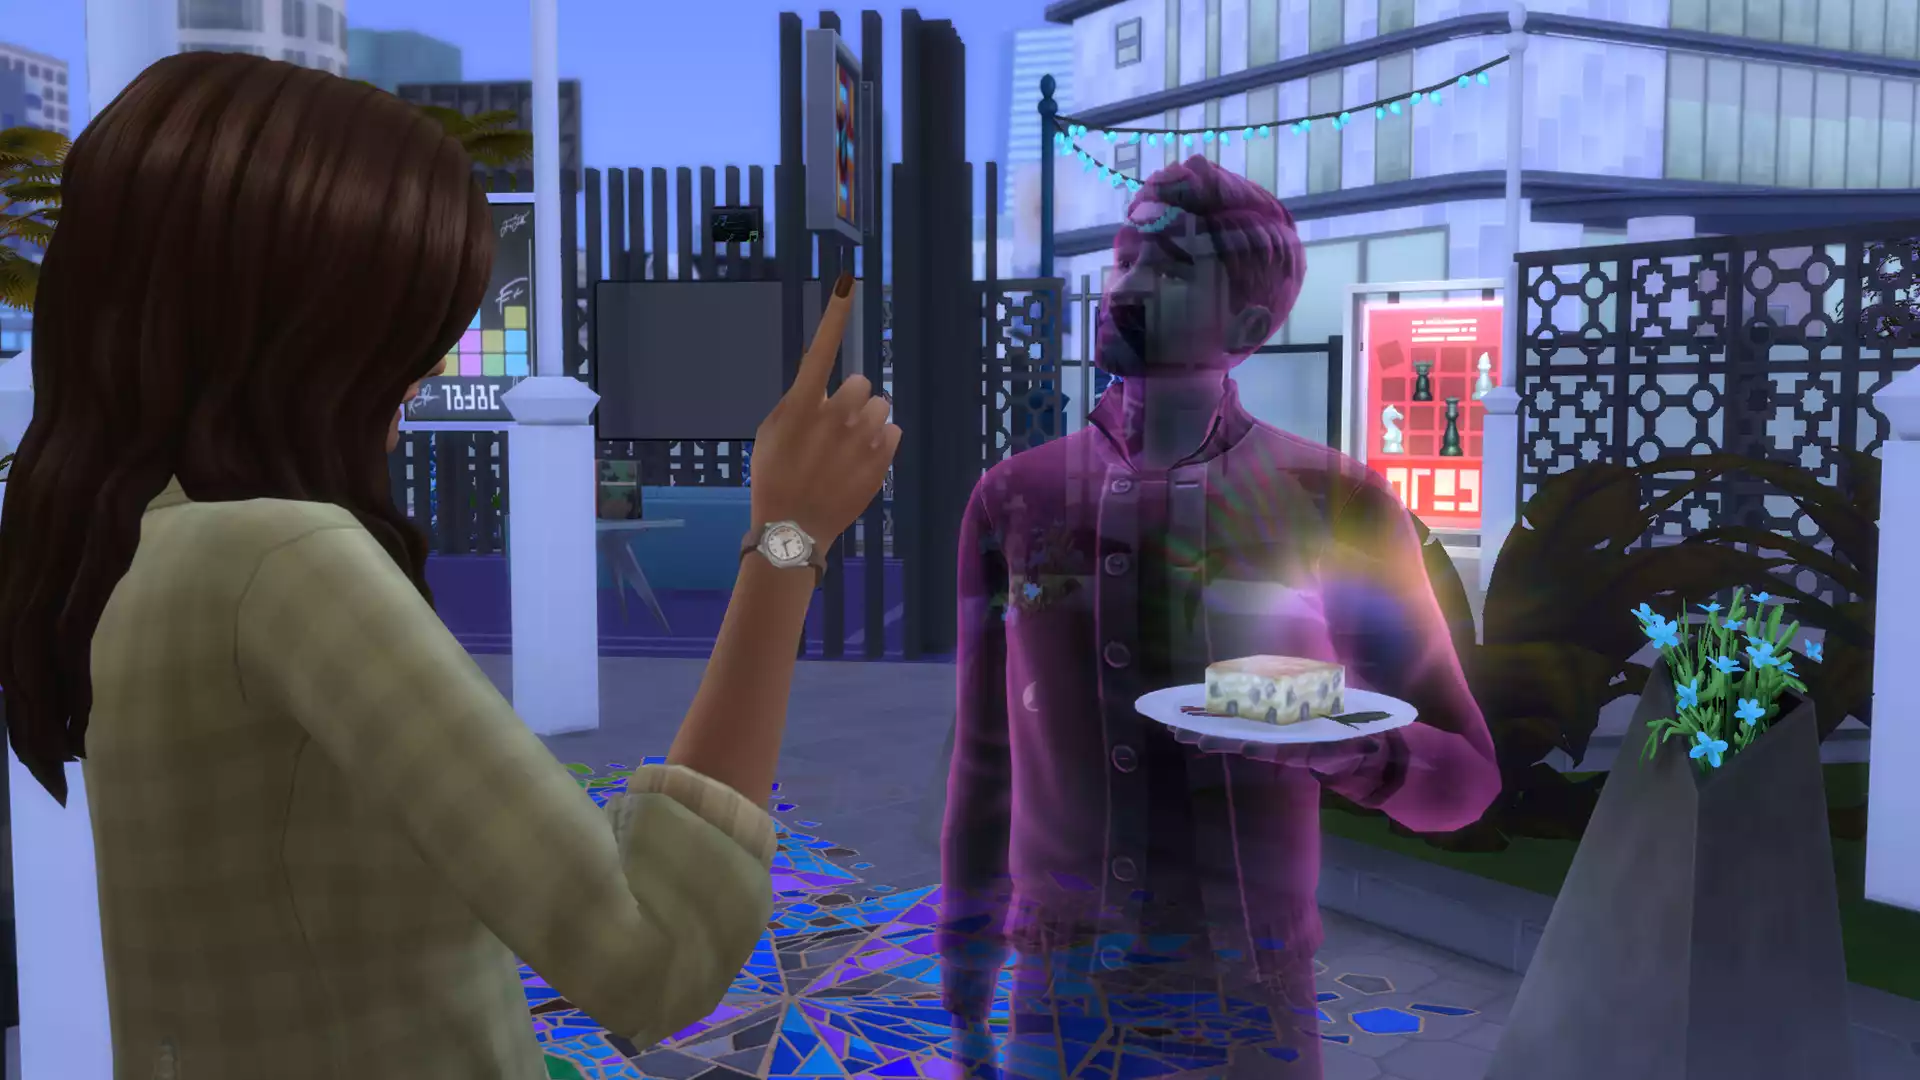 The Sims 4 Wonderful Whims Mod: What Is It?